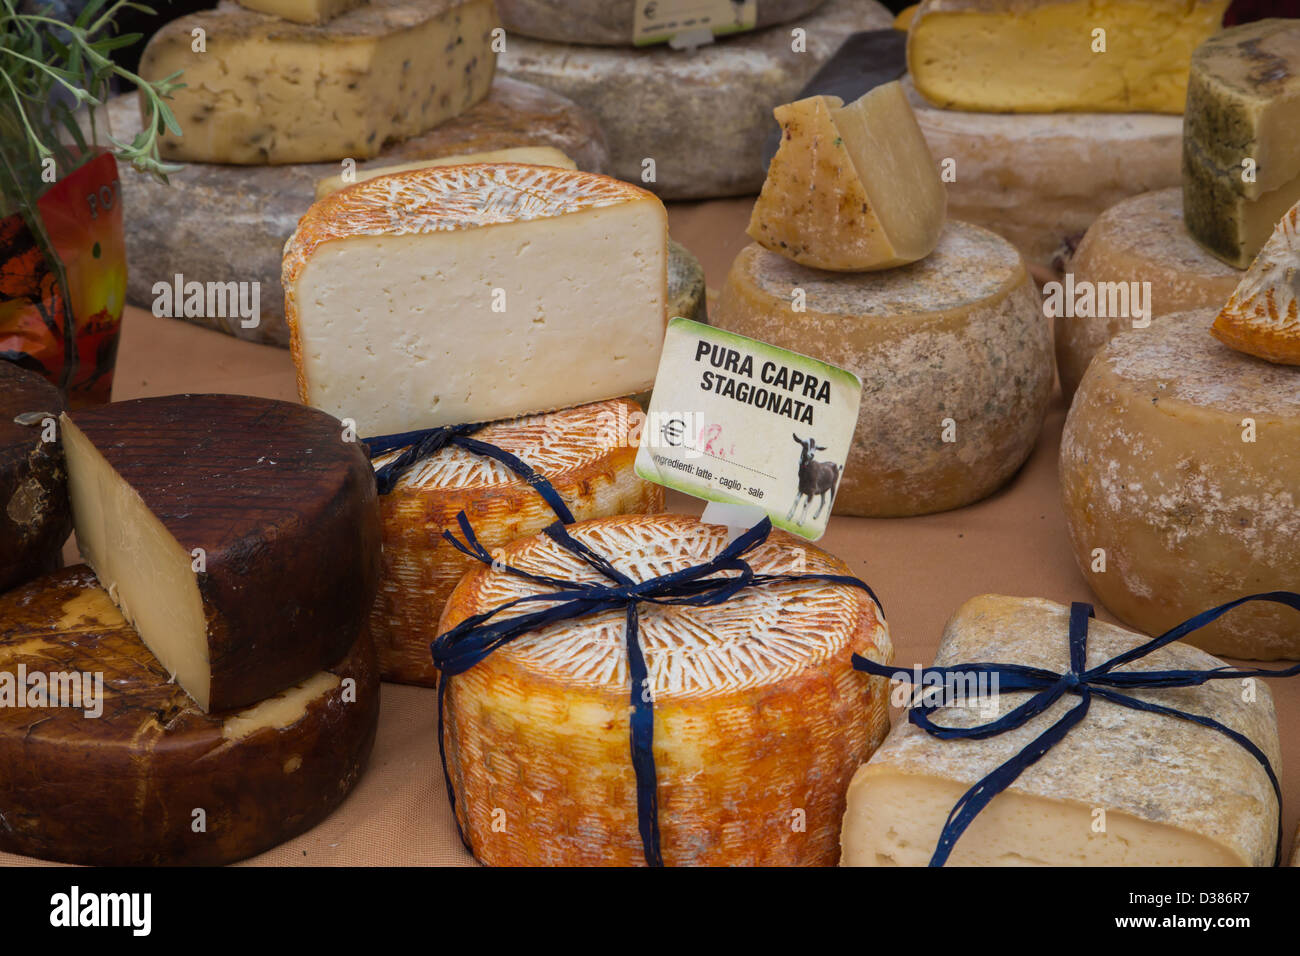 A variety of cheeses on display in a market in Turin Italy Stock Photo